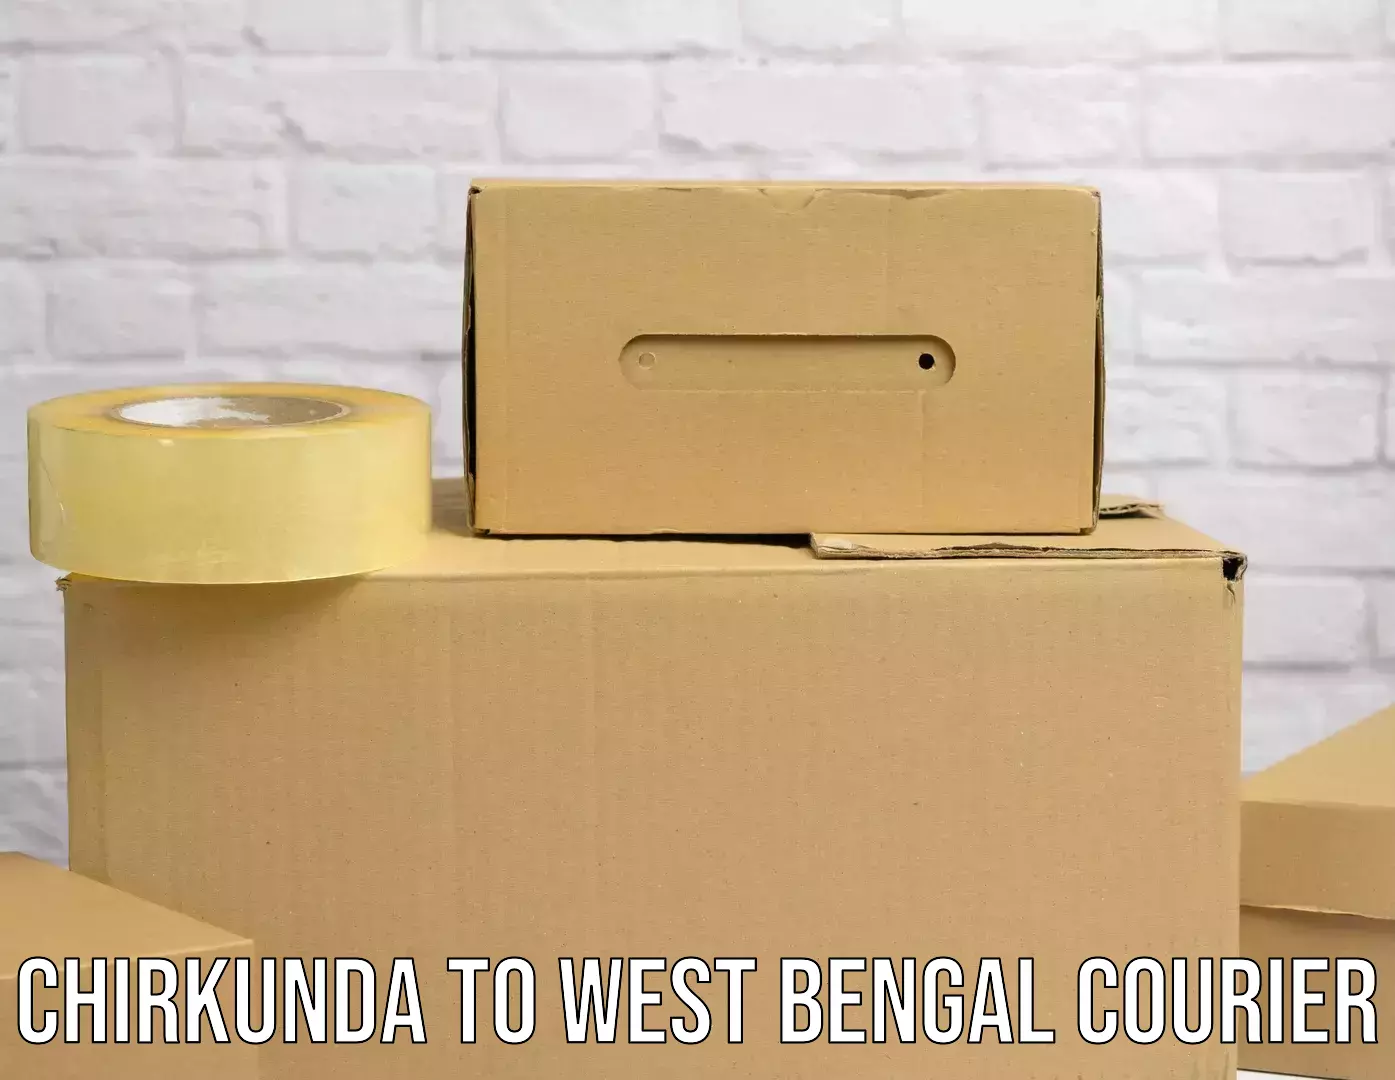 24-hour courier service in Chirkunda to West Bengal